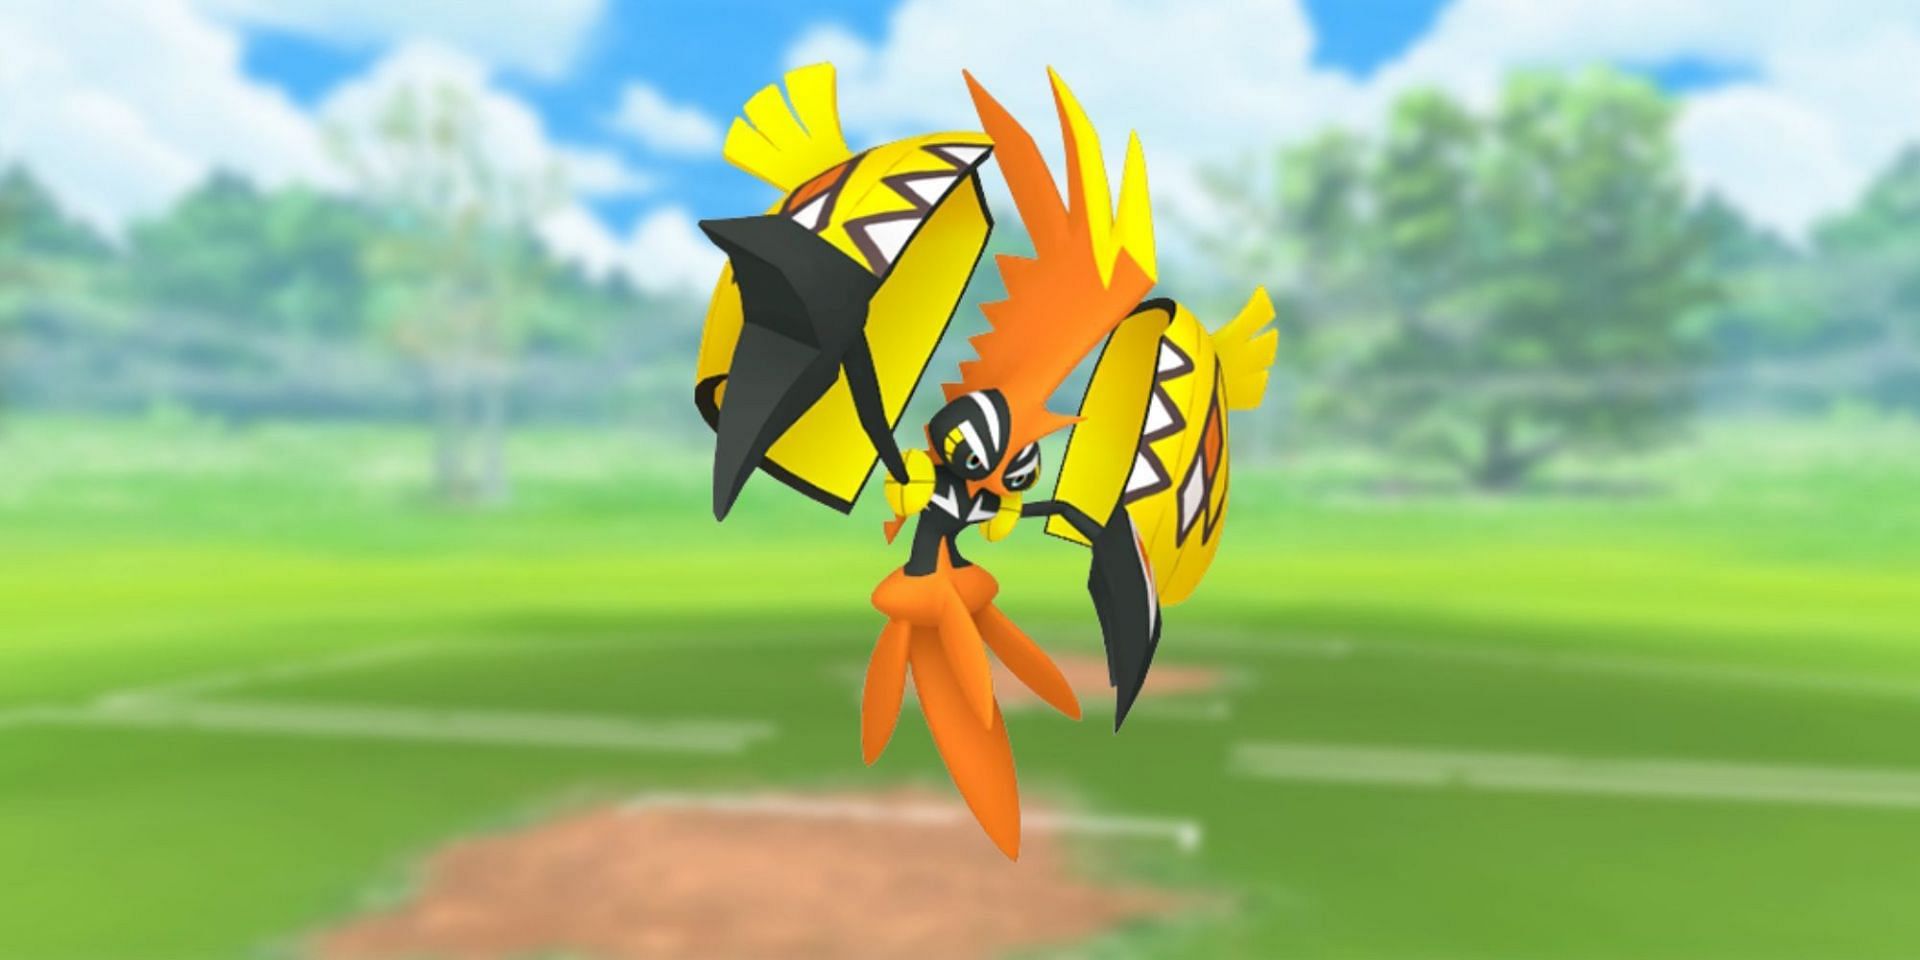 Tapu Koko (Pokémon GO) - Best Movesets, Counters, Evolutions and CP